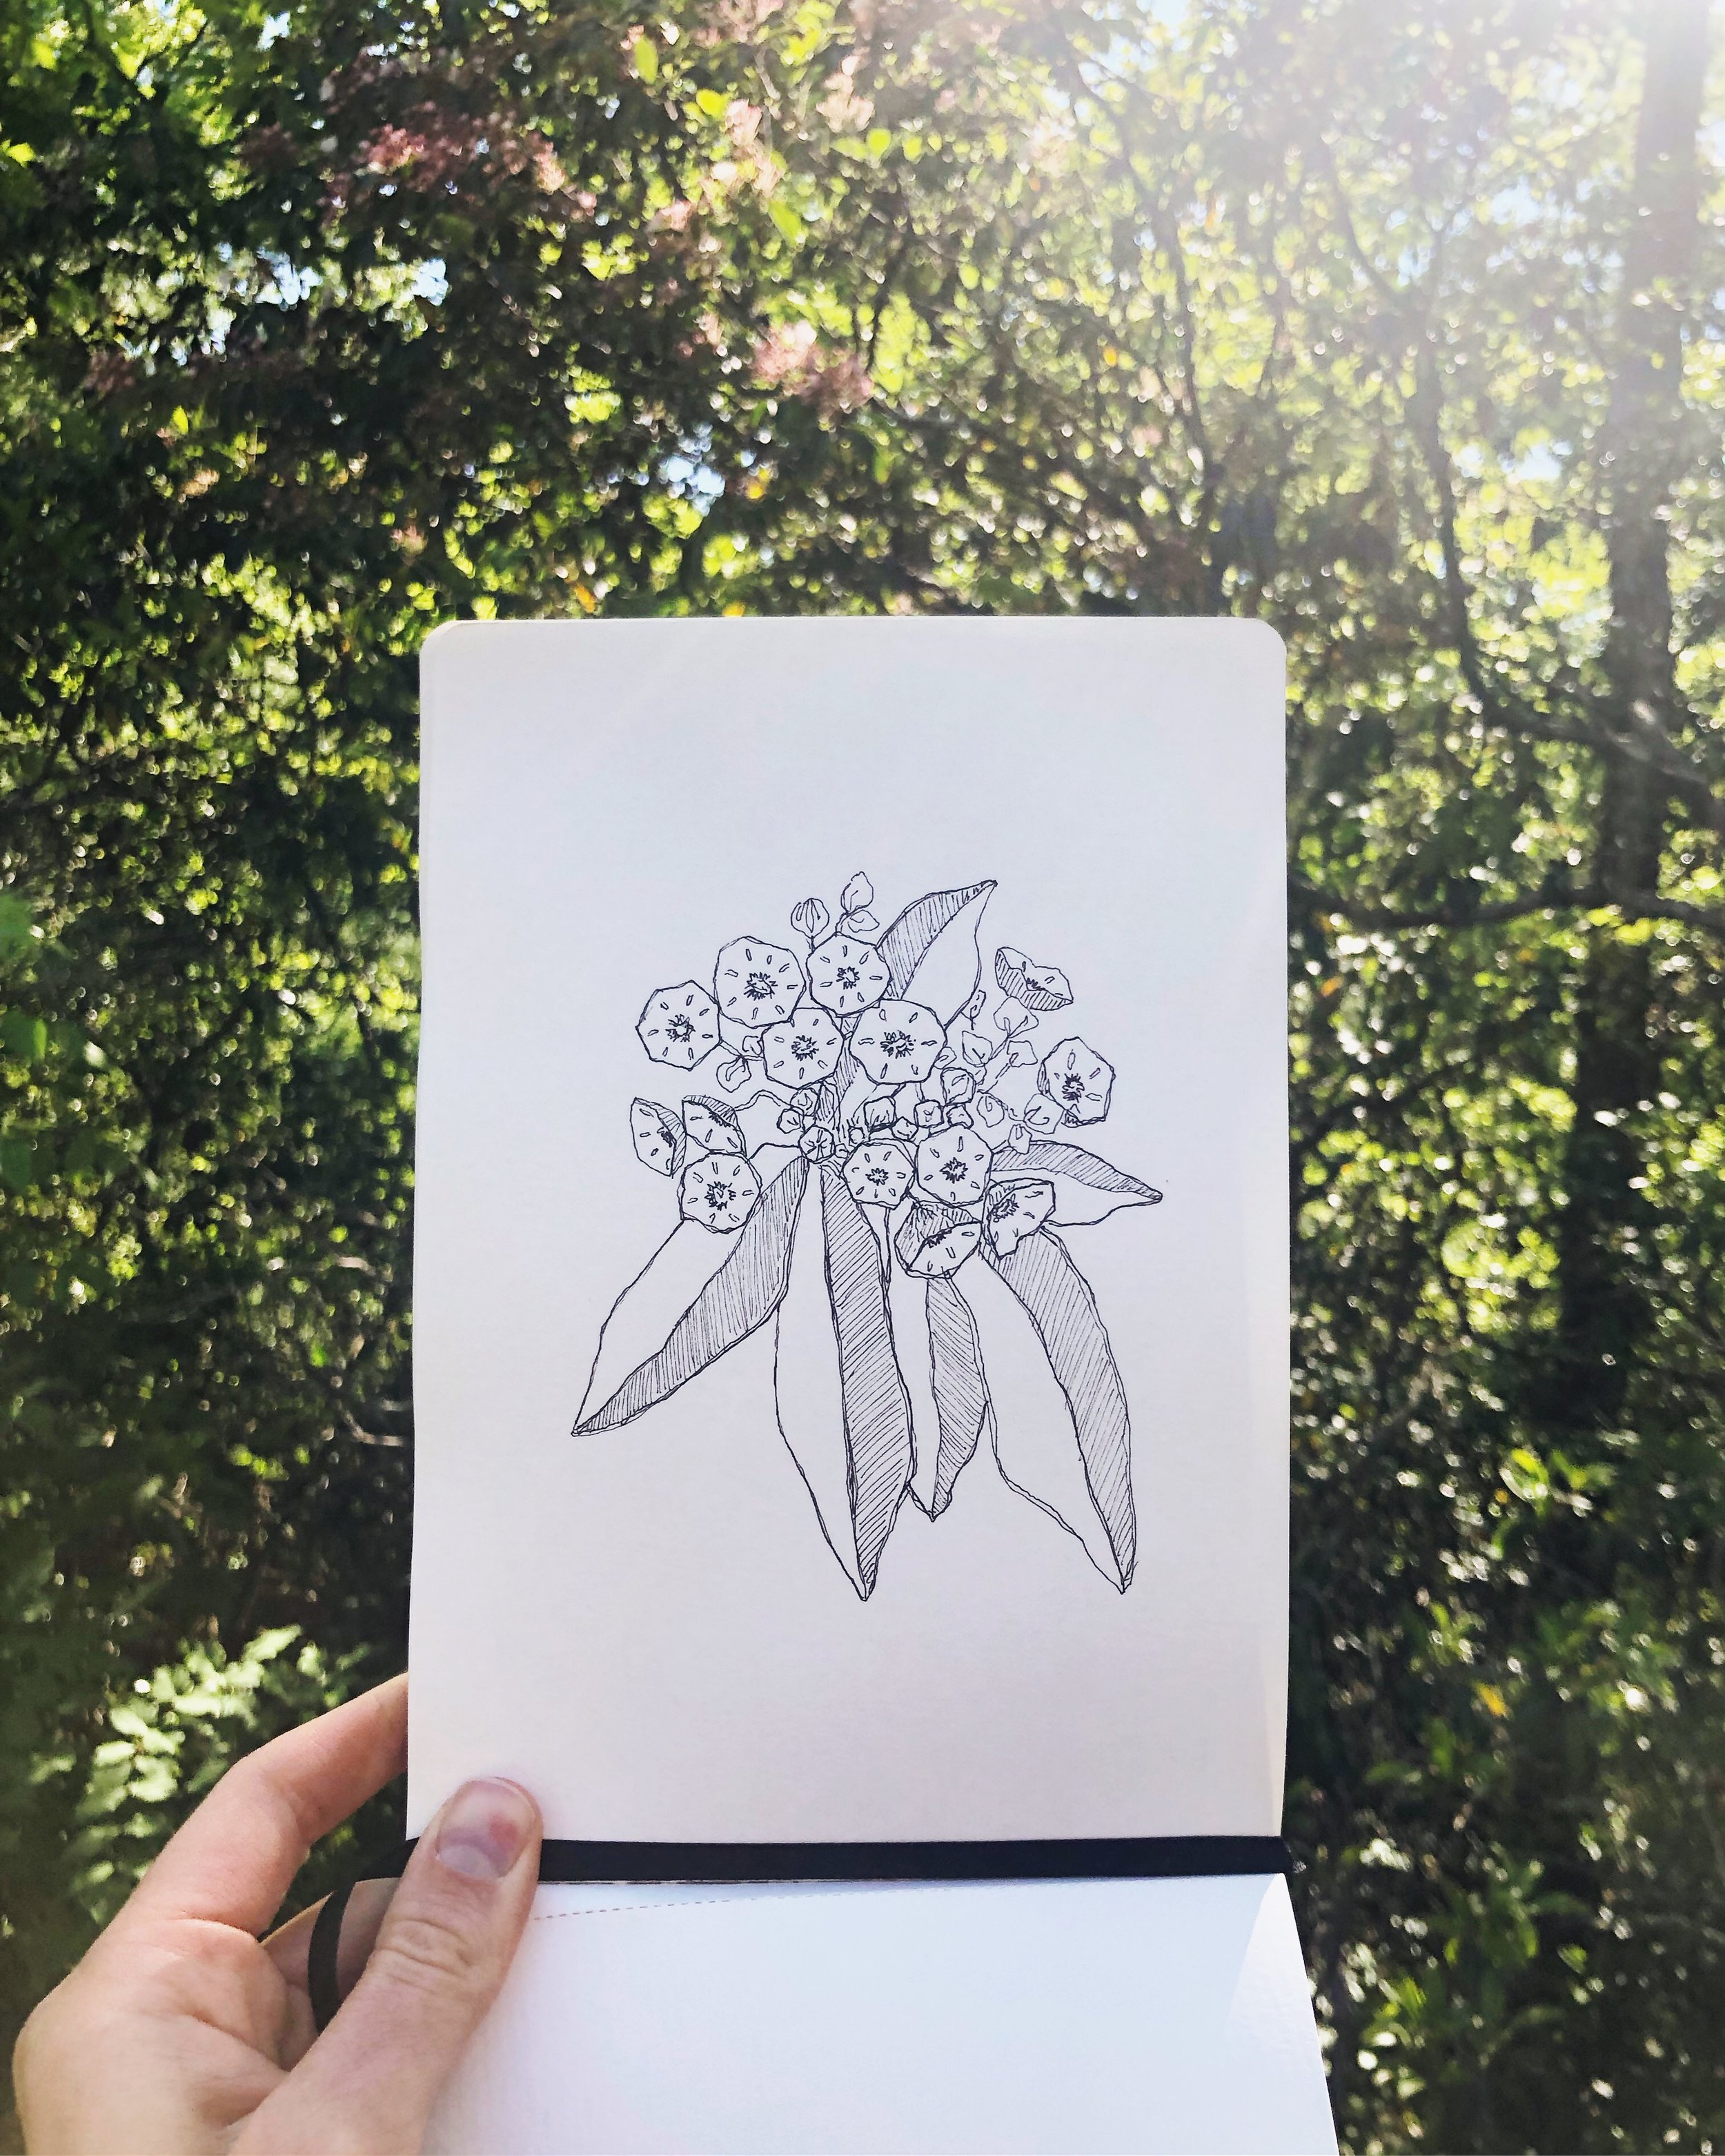  Amidst a string of nights out of town and days away from home, I brought out the sketchbook and doodled this Mountain Laurel… 